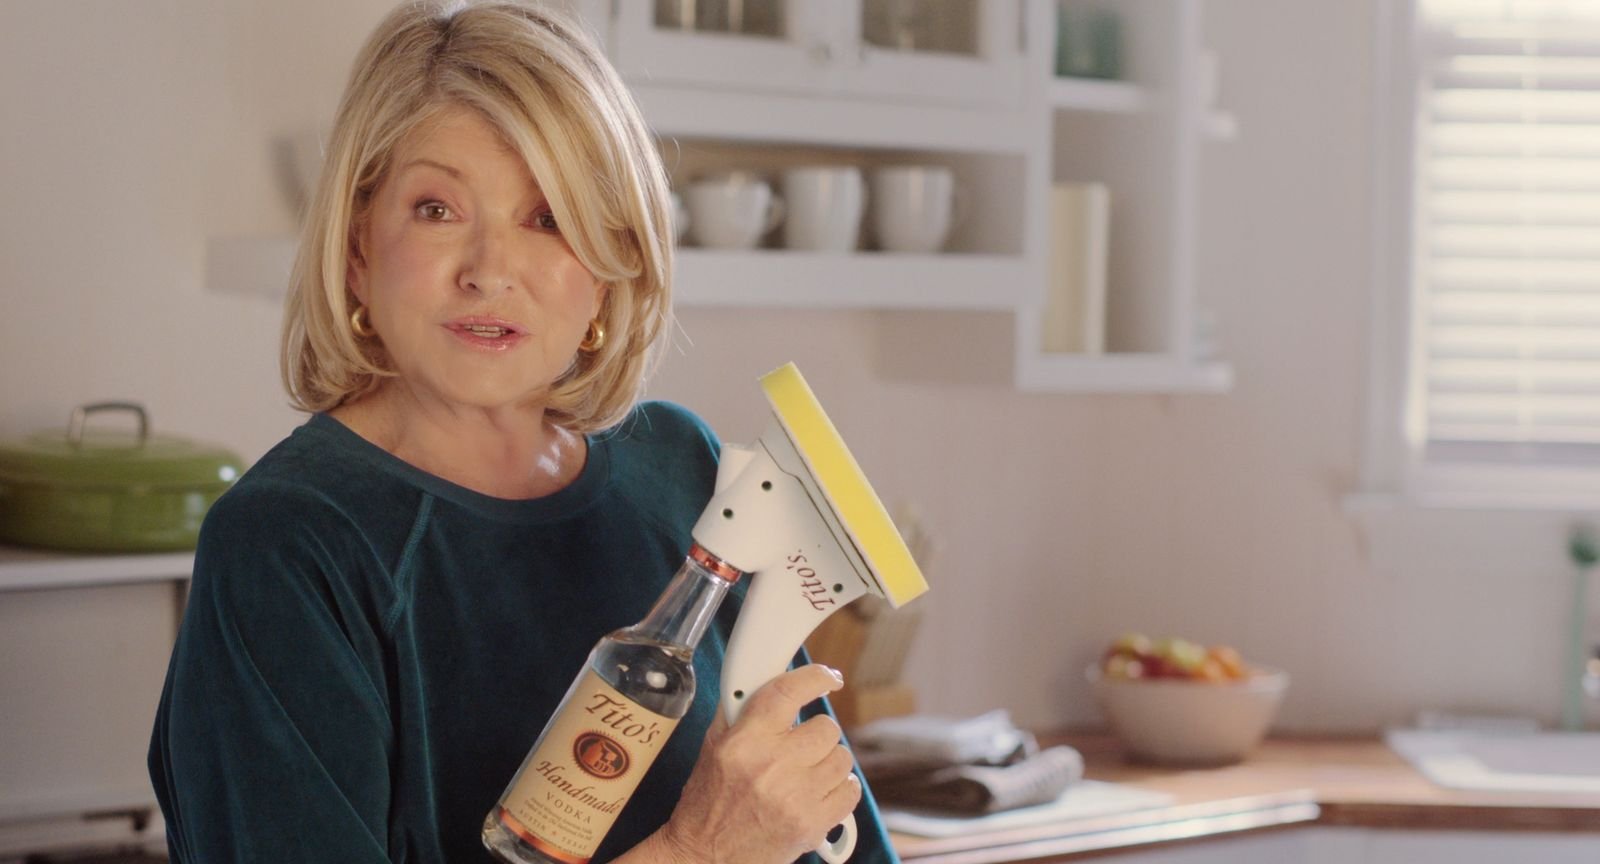 Martha Stewart holds up a cleaning product filled with Tito's Vodka